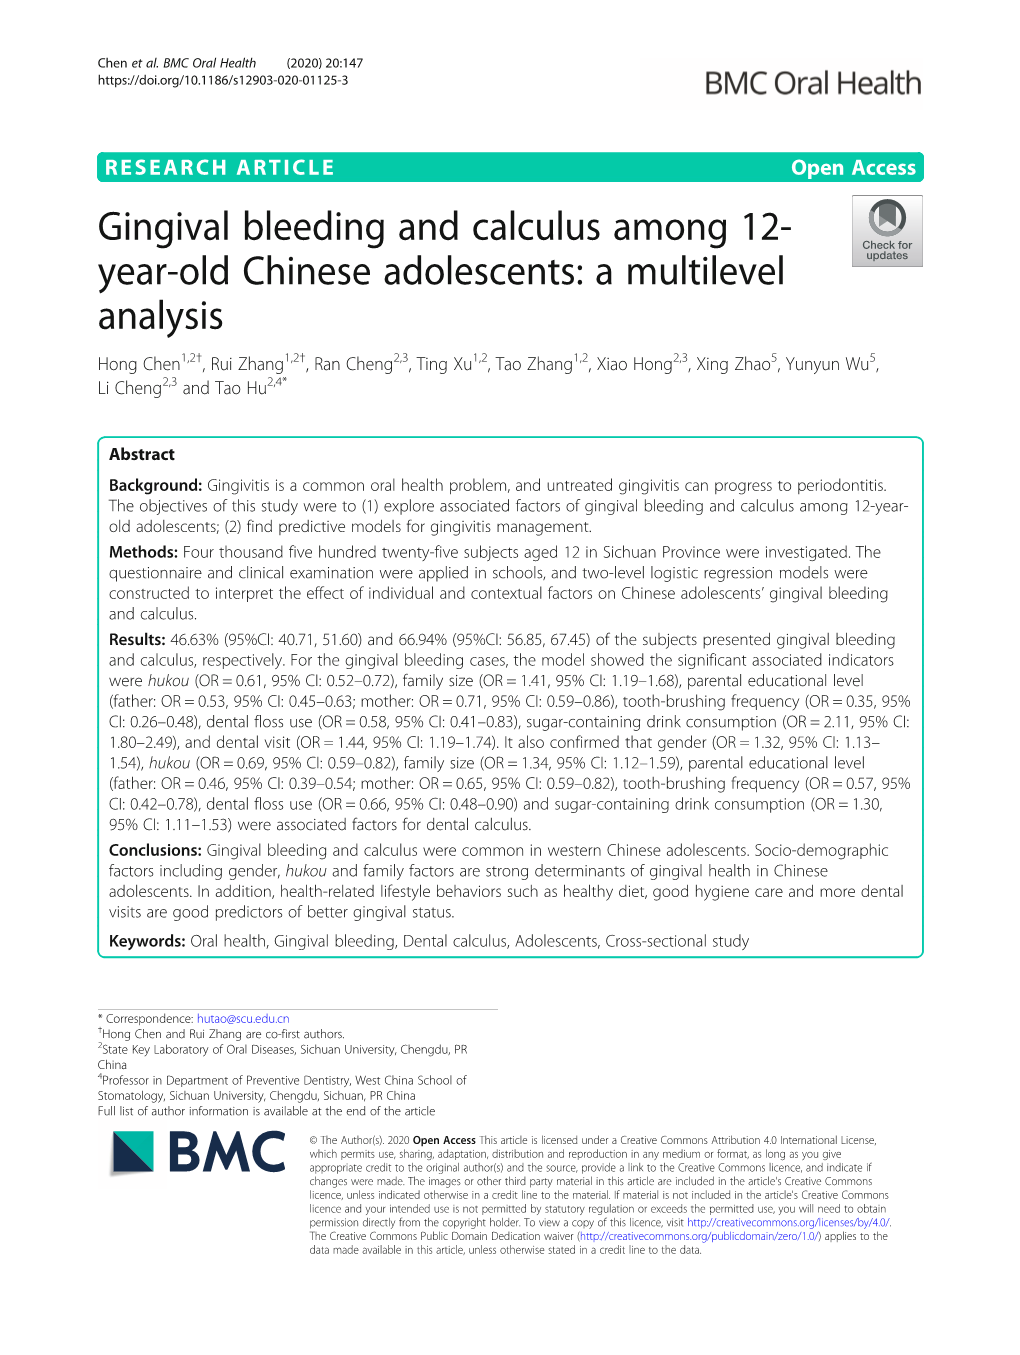 Gingival Bleeding and Calculus Among 12-Year-Old Chinese Adolescents: a Multilevel Analysis